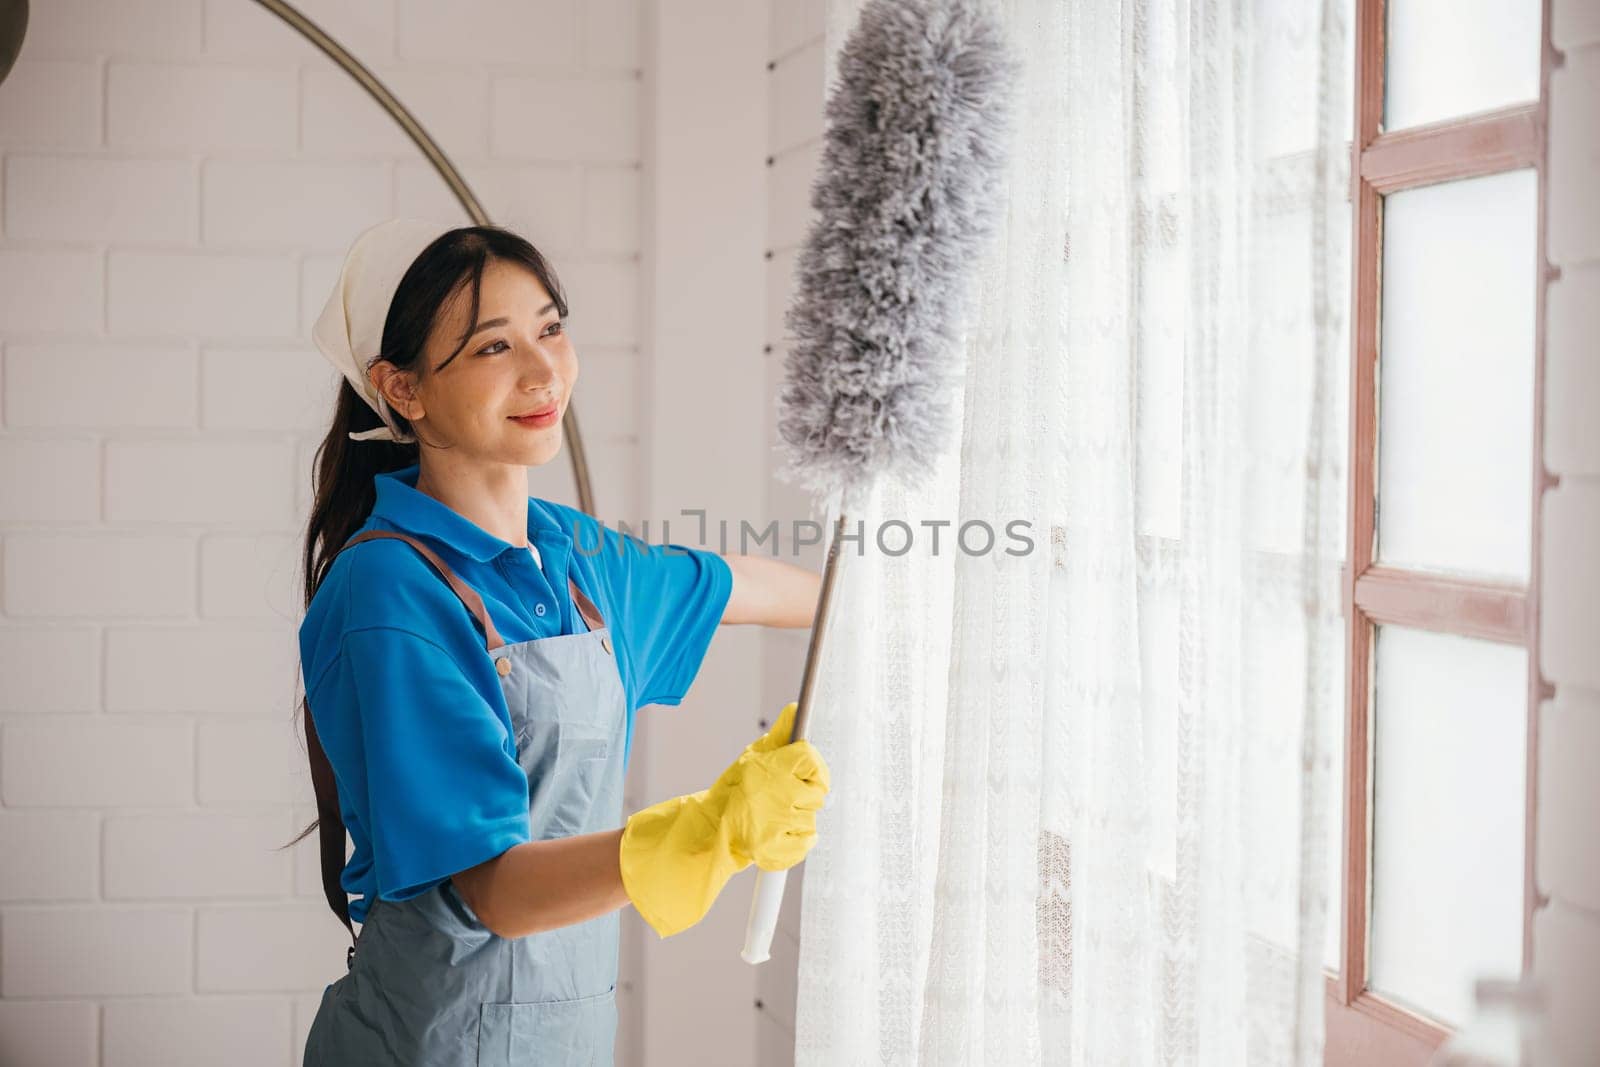 Asian woman's portrait while dusting window blinds. She stands holding duster smiling happily. Occupation involves house hygiene routine cleaning and care. Cleaning service for modern clean household.